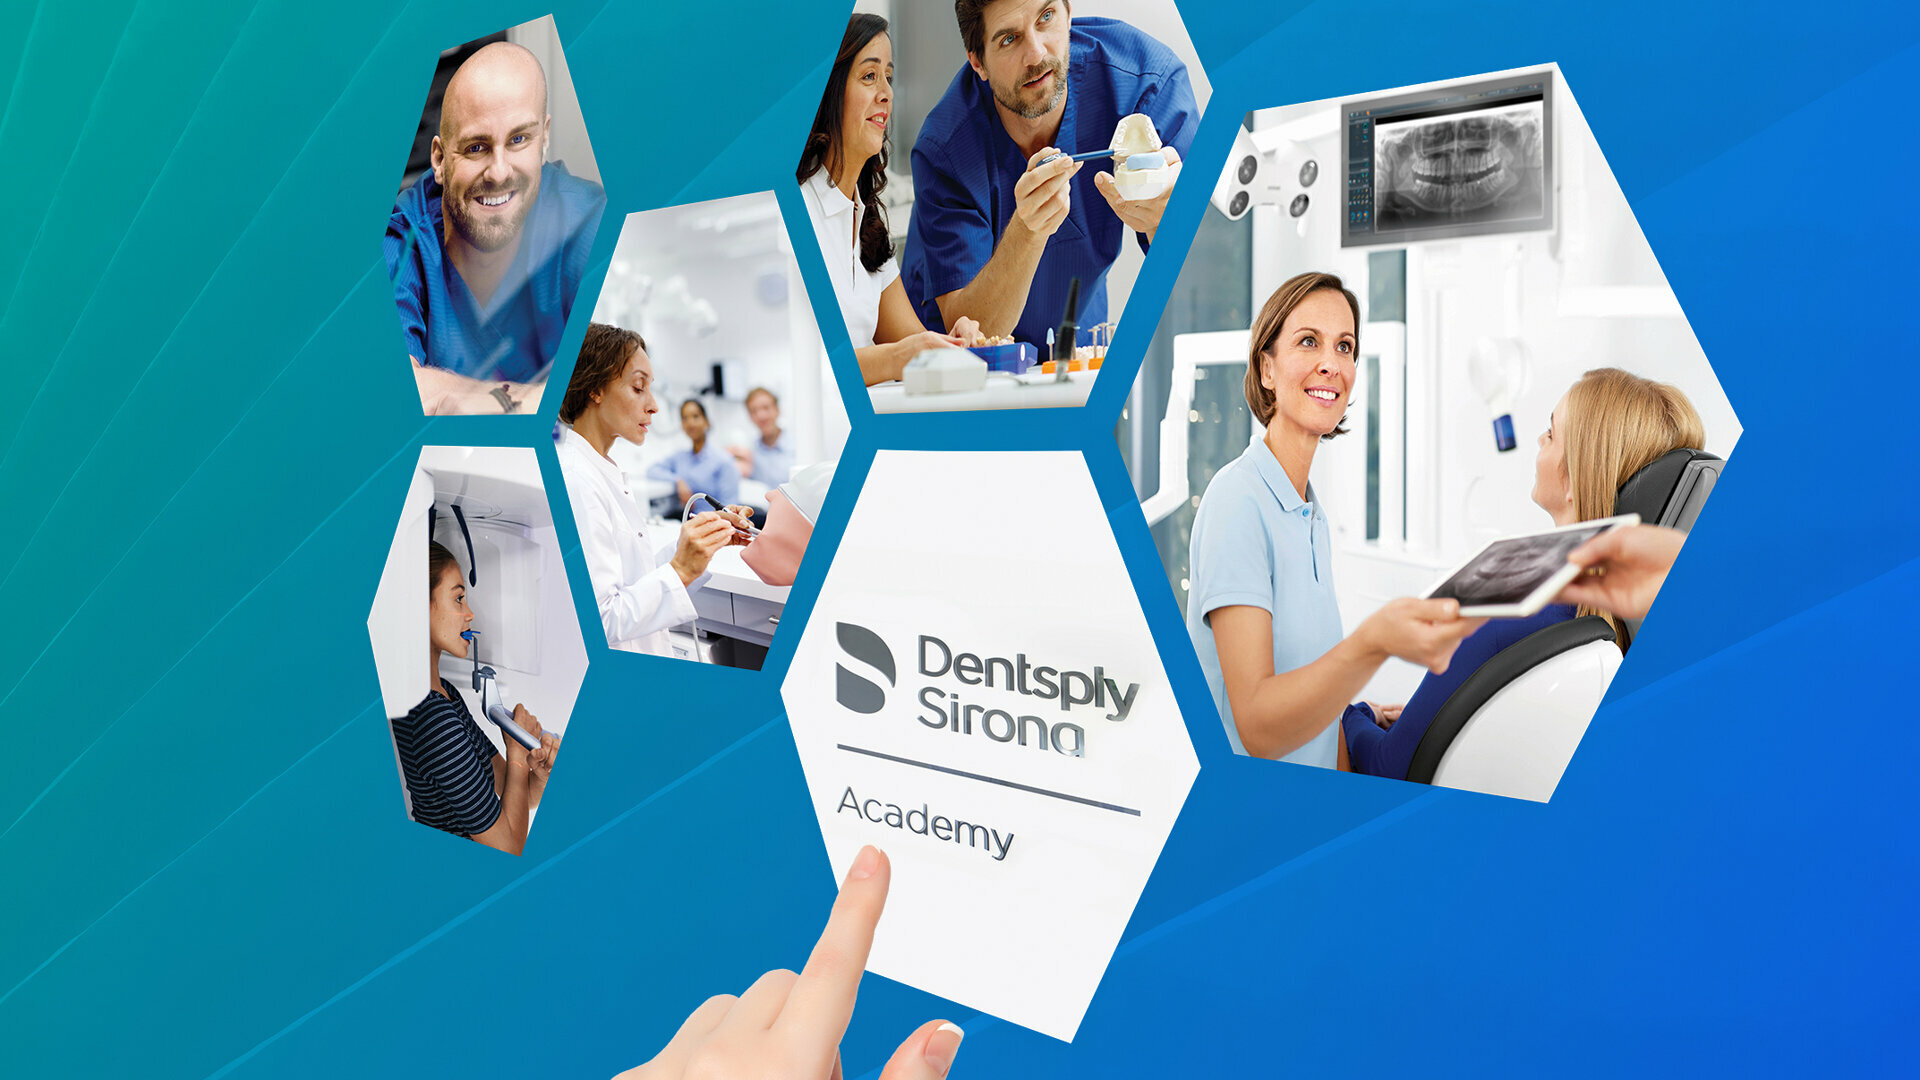 Dentsply Sirona launches the DS Academy Campus for digital dentistry education